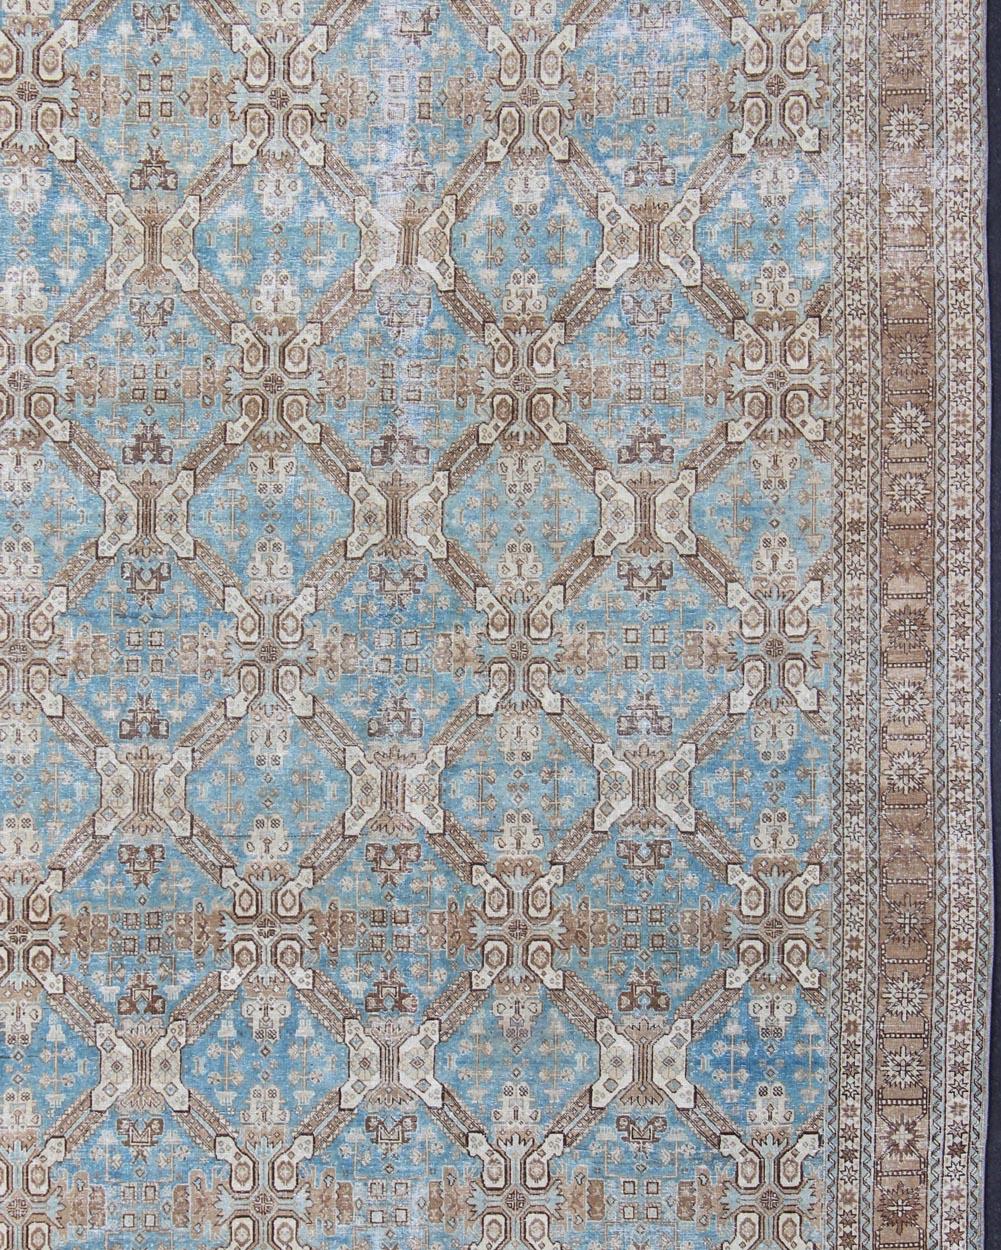 Brown, blue, and taupe geometric Persian Tabriz rug, rug SUS-1908-22, country of origin / type: Iran / Tabriz, circa 1920

This antique Tabriz carpet from 1920s Persia features a field filled with an all-over design interconnected geometric